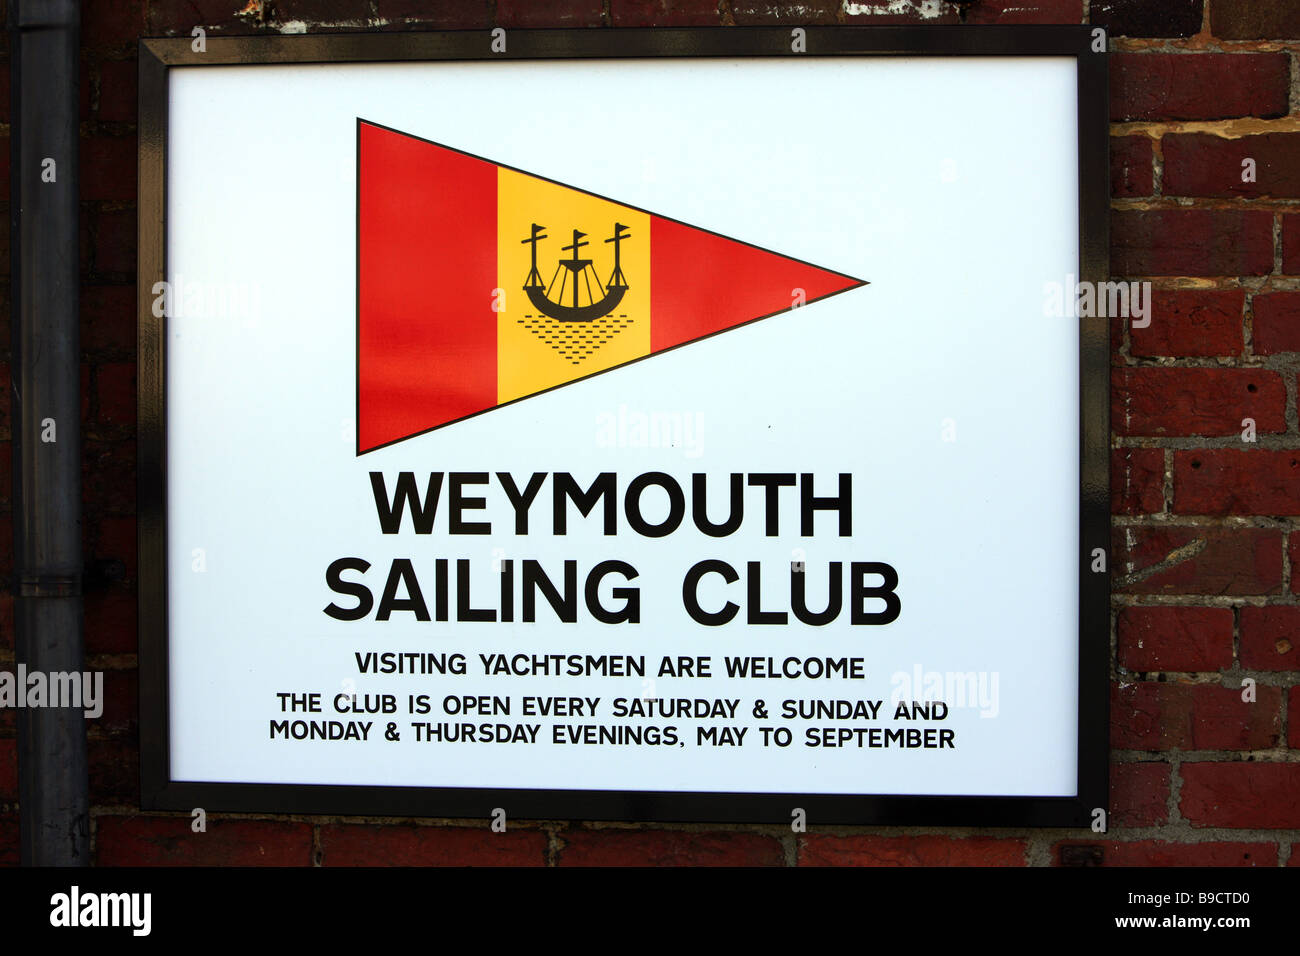 Weymouth Sailing Club House sign Banque D'Images